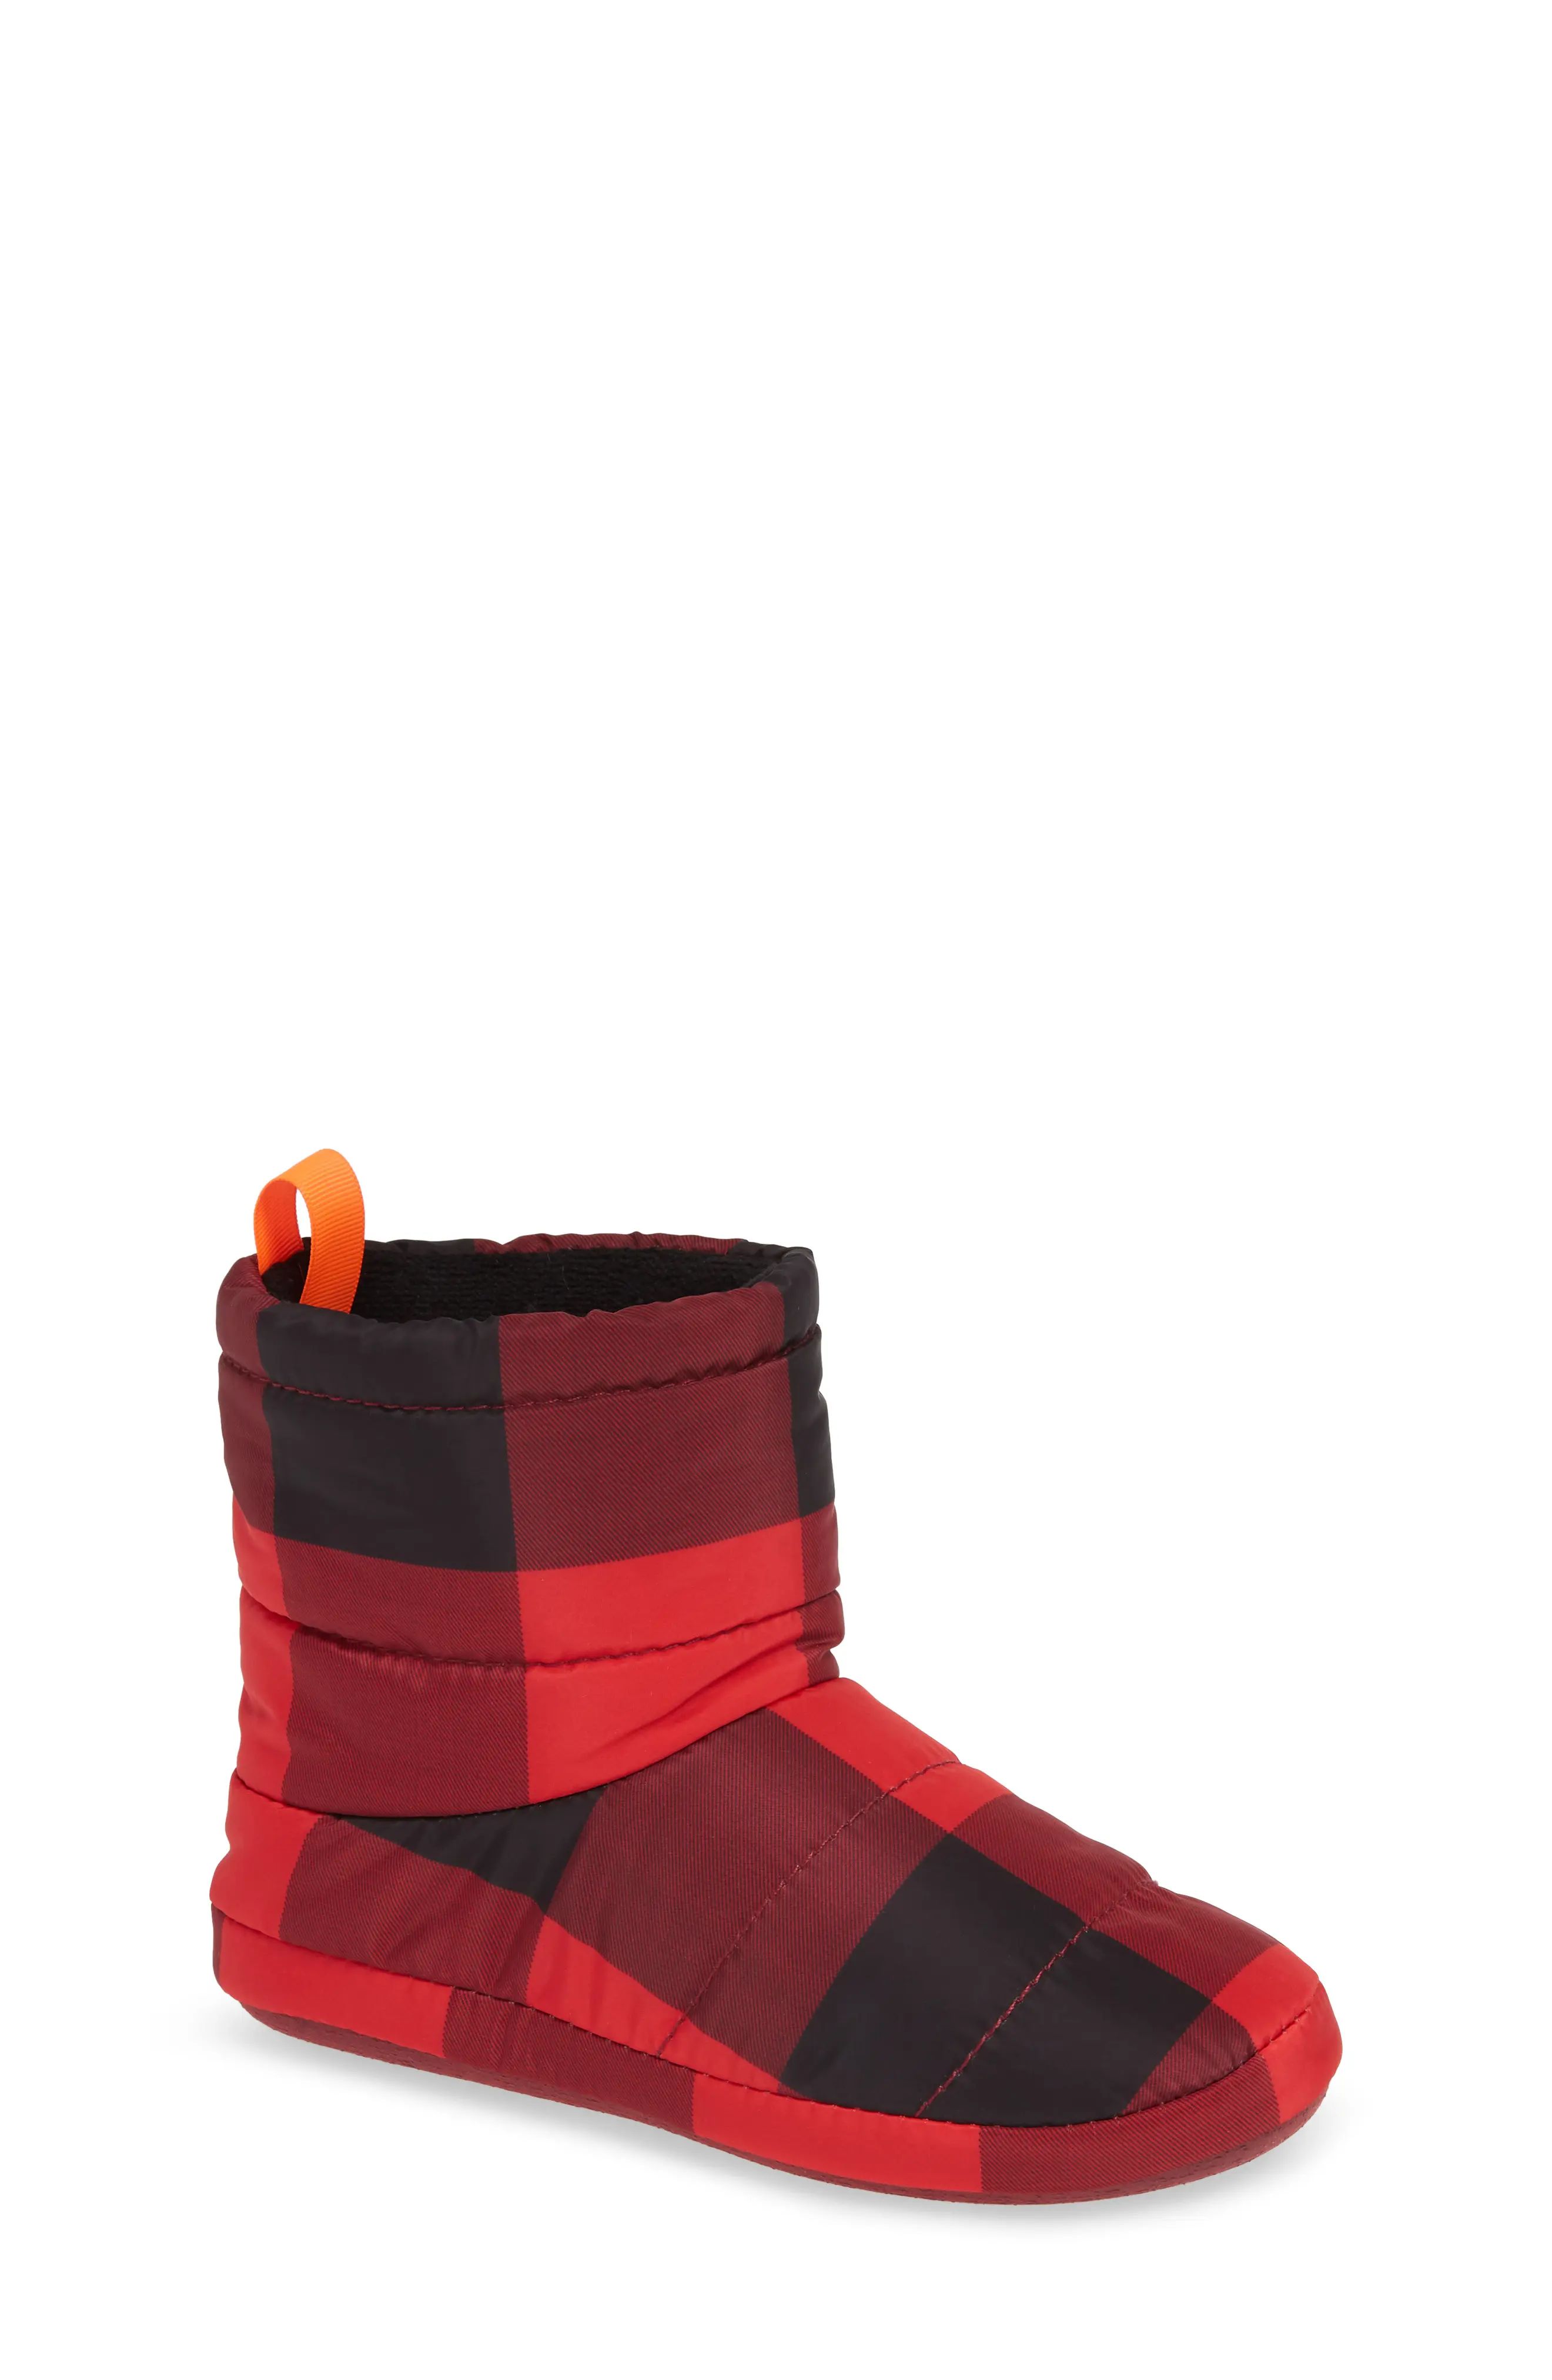 Toddler Crewcuts By J.crew Buffalo Check Fleece Lined Slipper Boot, Size 9 M - Black | Nordstrom